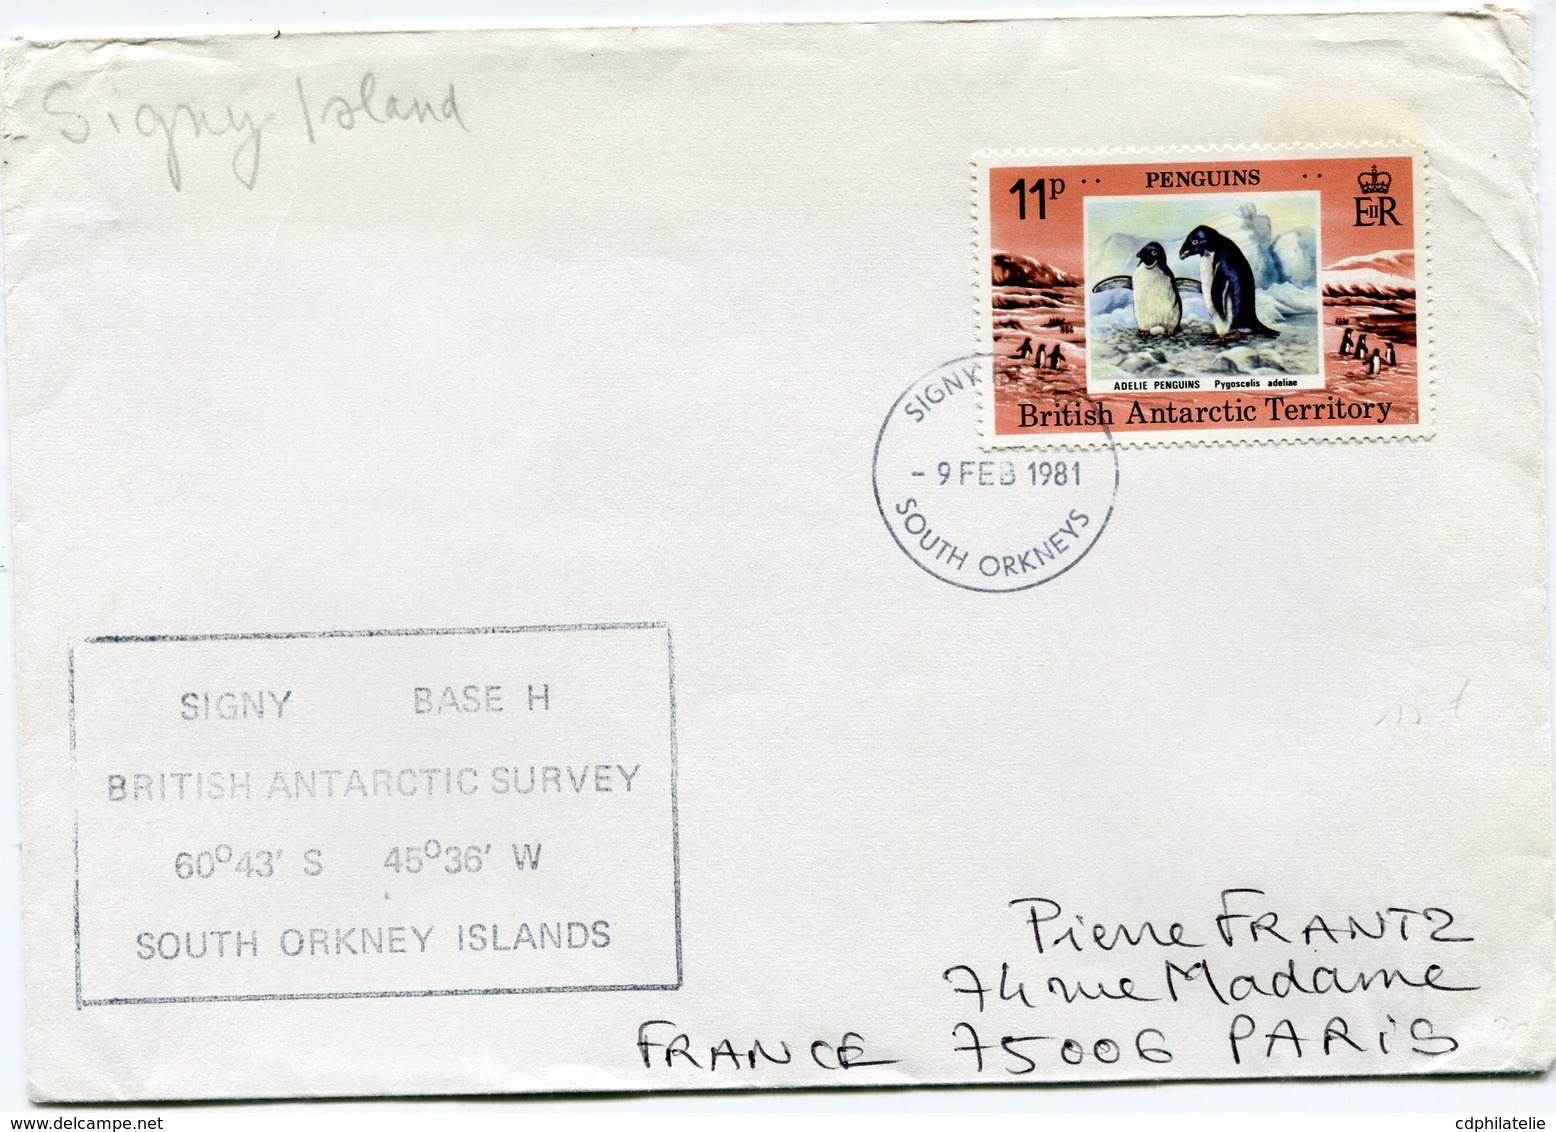 B. A. T. LETTRE DEPART SIGNY ISLAND 9 FEB 1981 SOUTH ORKNEYS POUR LA FRANCE - Covers & Documents